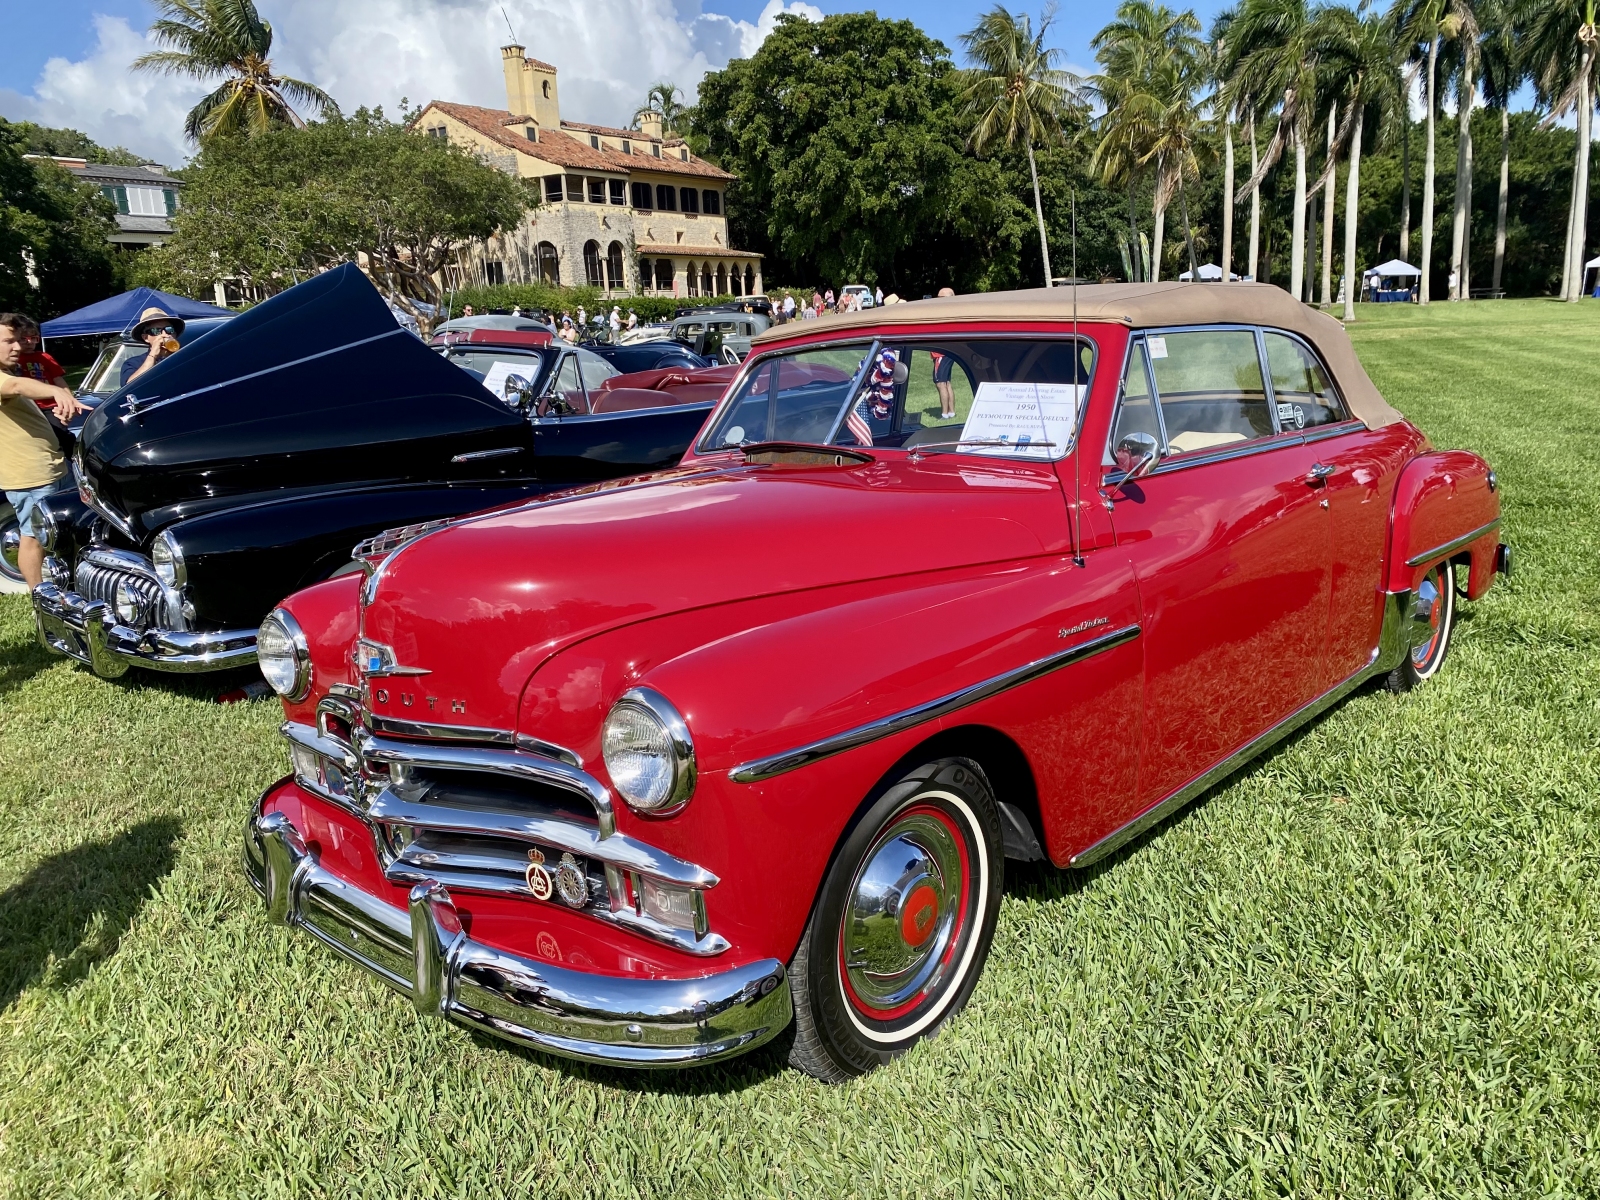 1950-Plymouth-Special-Deluxe-by-Raul-Rufat